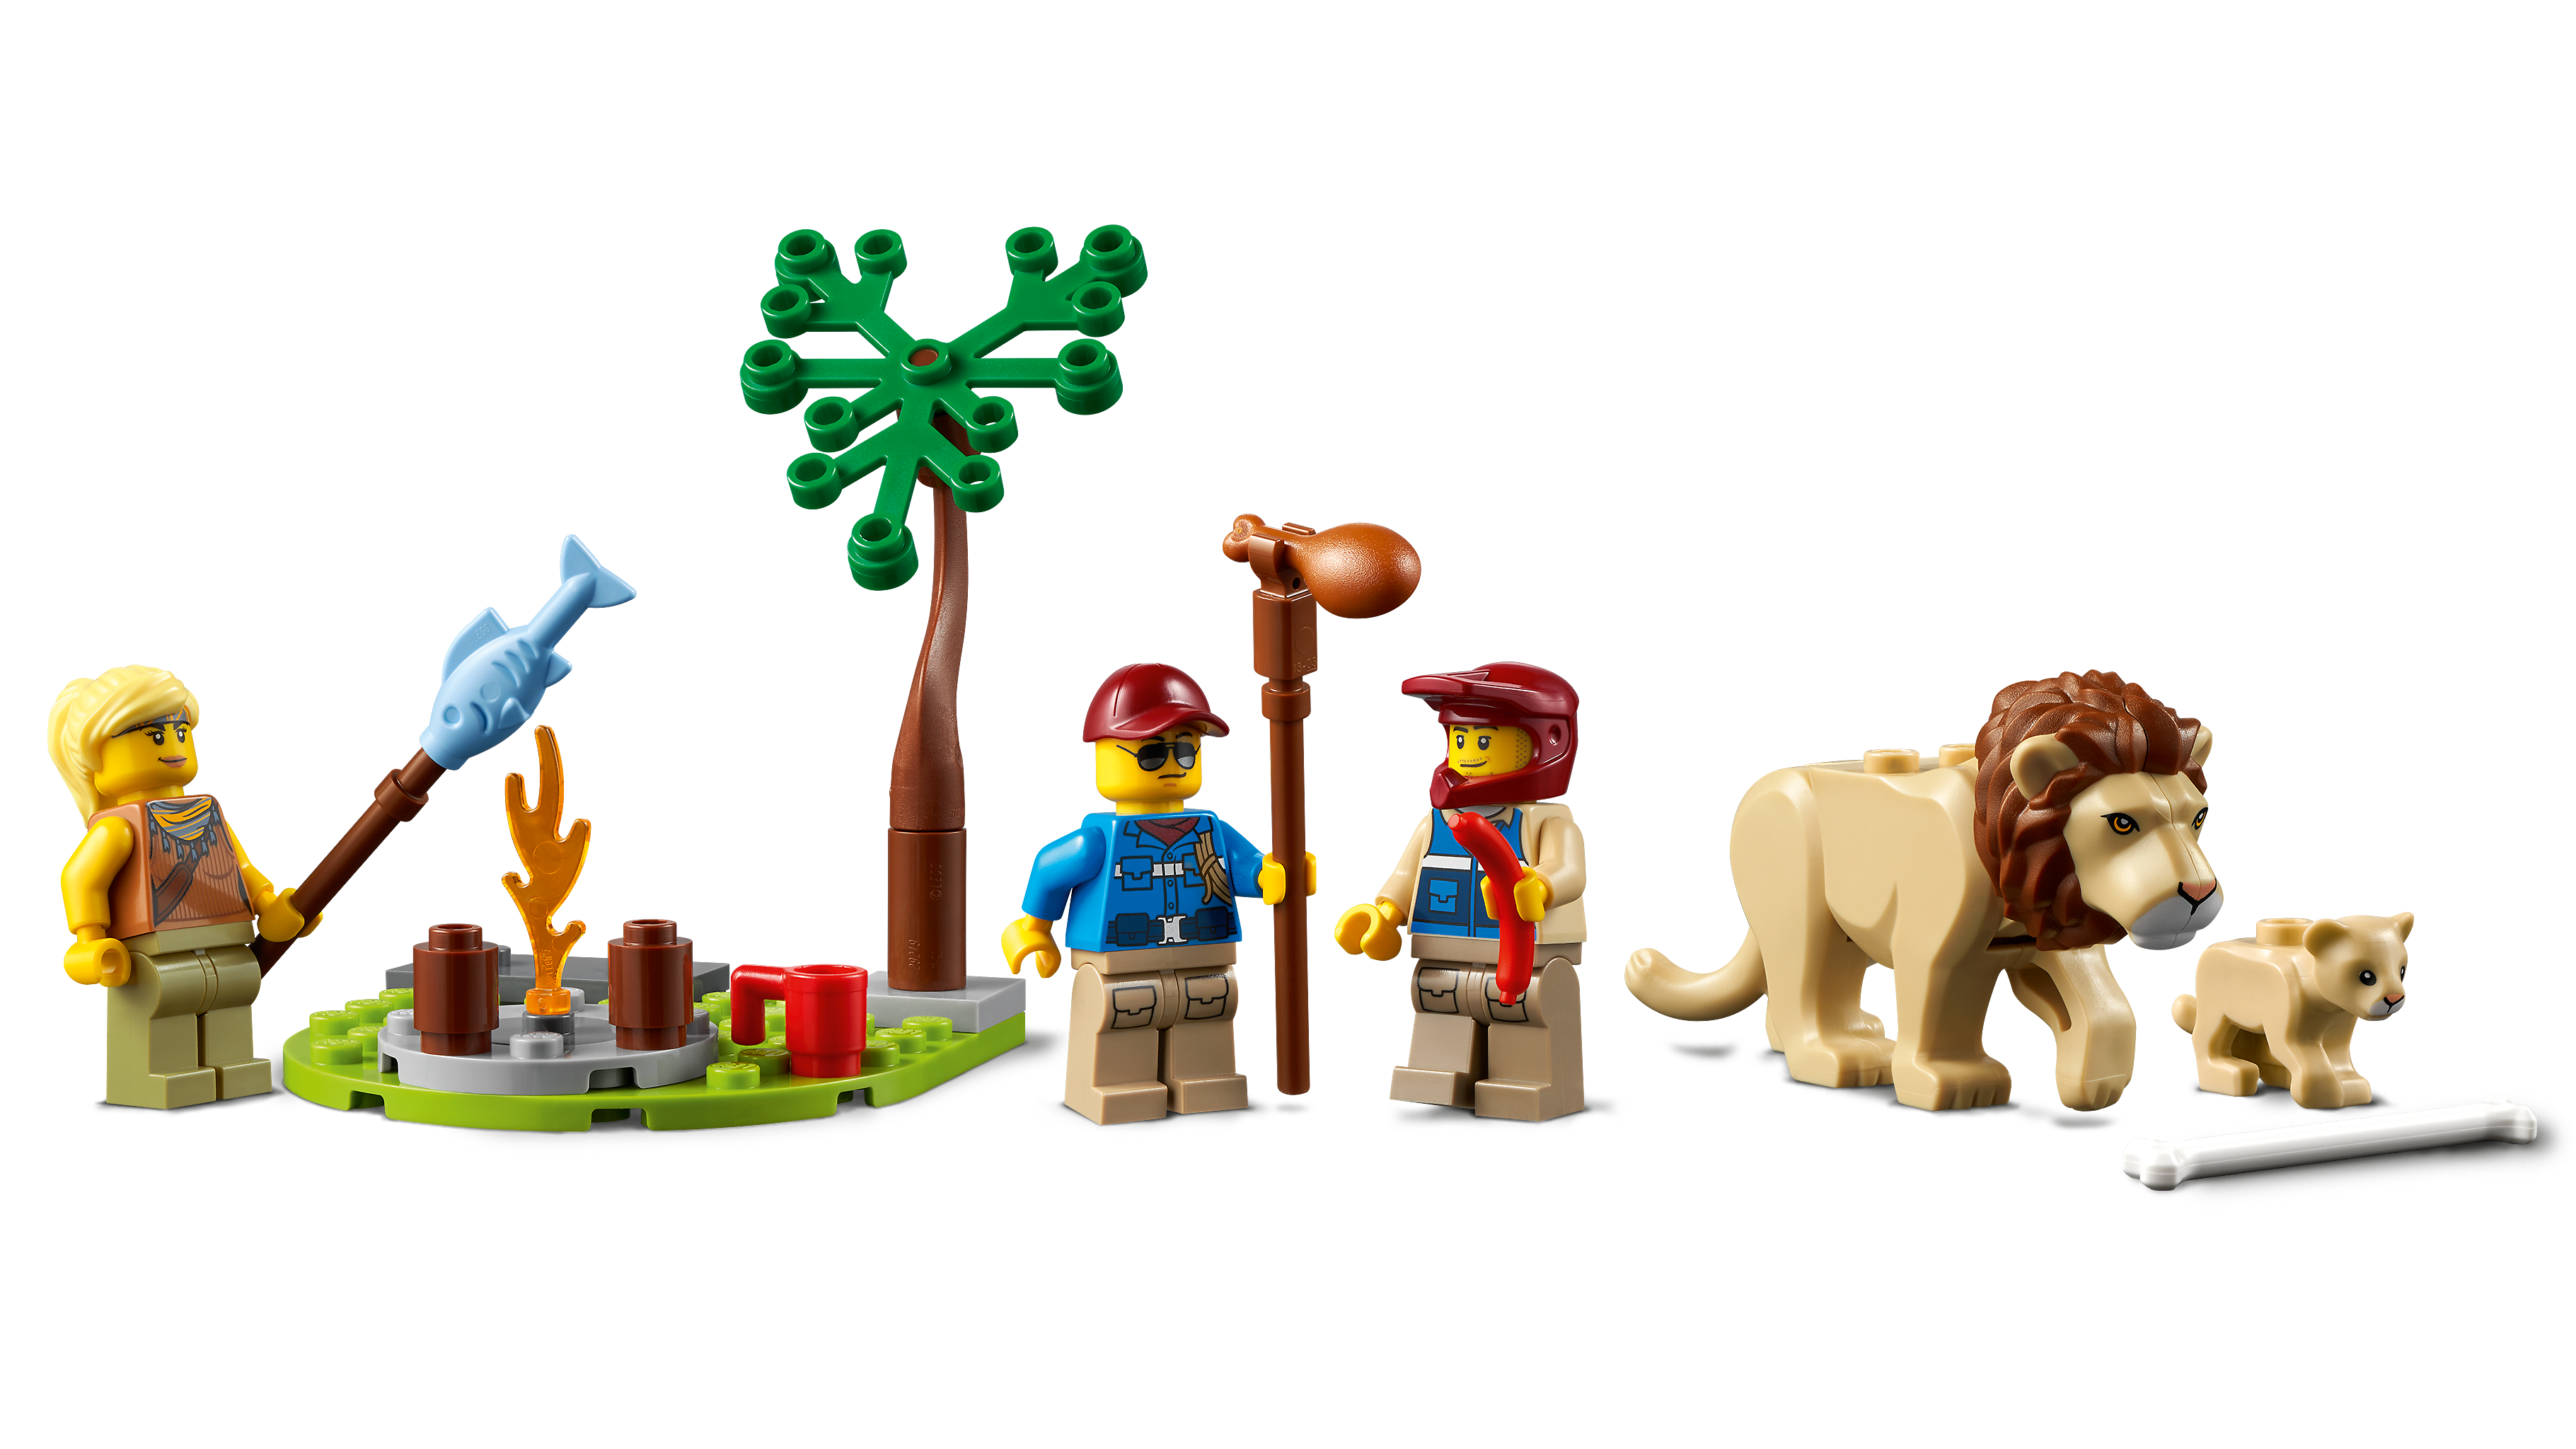 Building Set with Animal Figures LEGO 60301 City Wildlife Rescue Off Roader Vehicle Car Toy Years Old Gift Idea for Preschool Kids 4